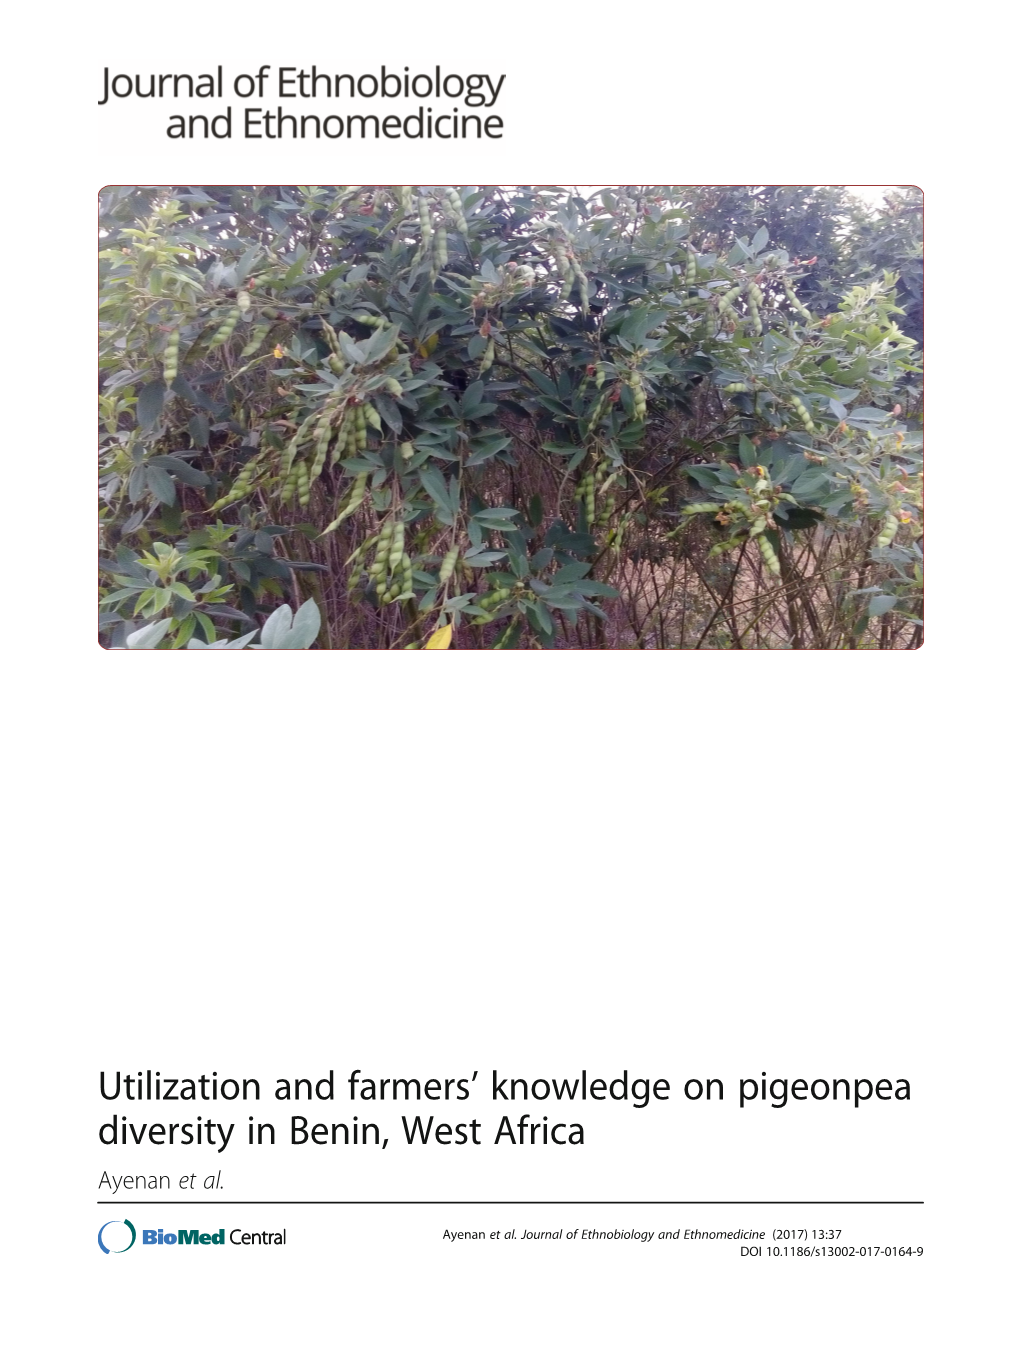 Utilization and Farmers' Knowledge on Pigeonpea Diversity in Benin, West